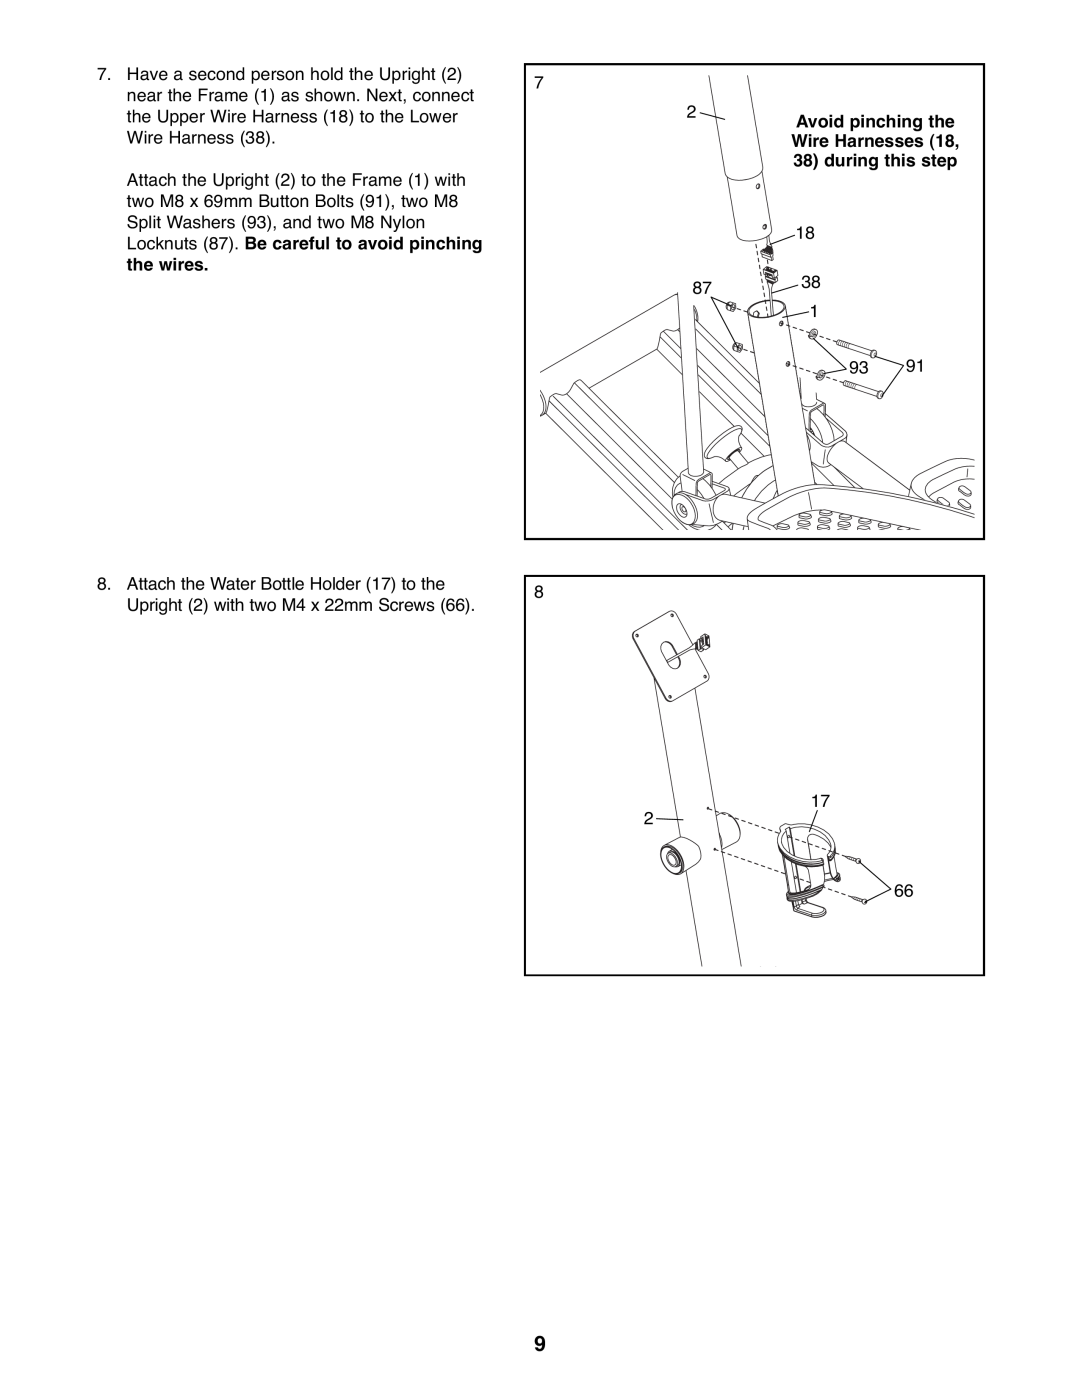 ProForm PFEL73207.0 user manual Avoid pinching the Wire Harnesses 18, 38 during this step 